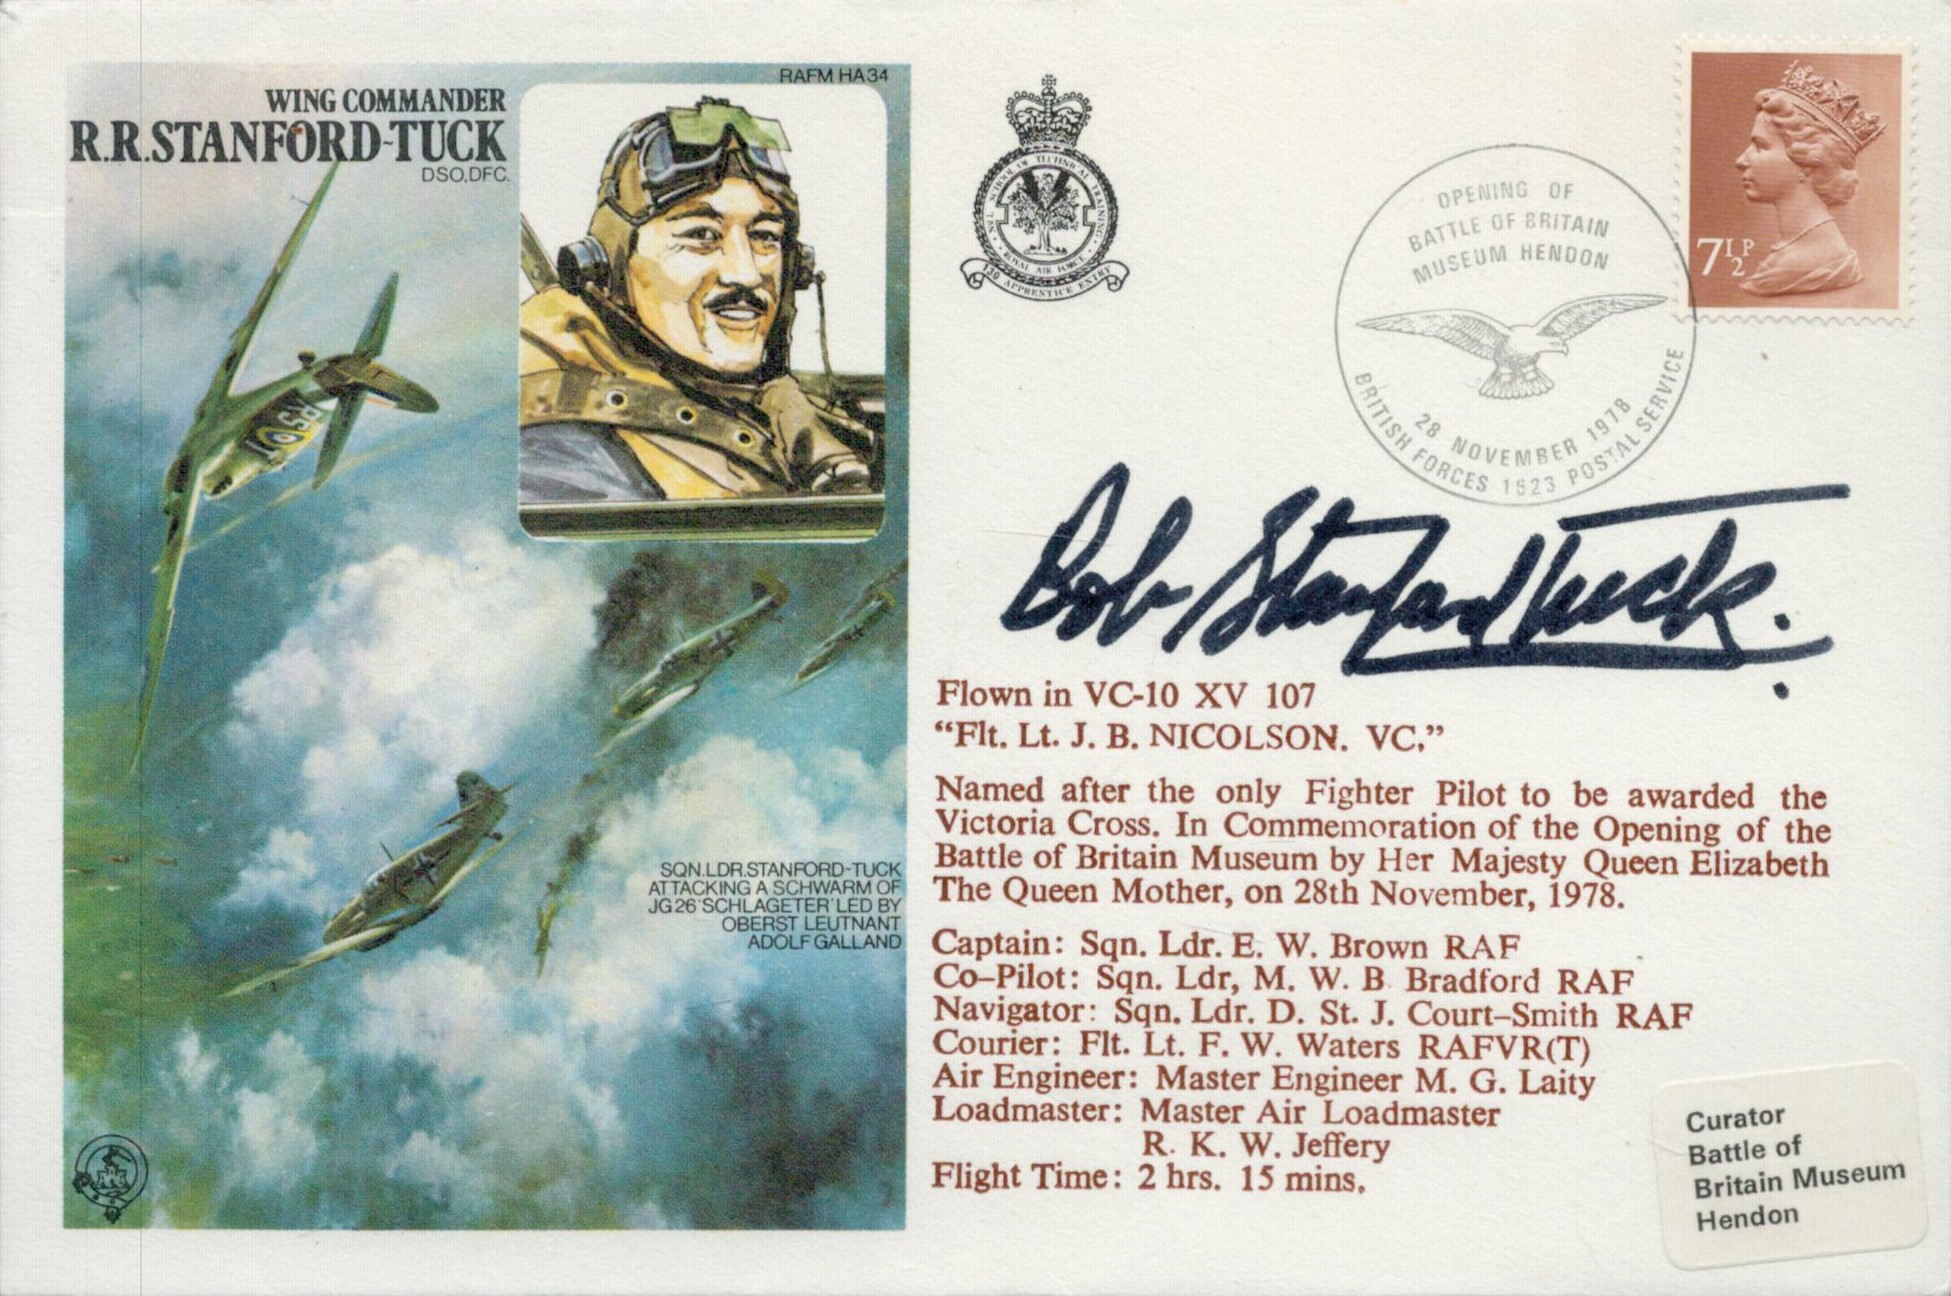 WW2 BOB fighter pilot Wg Cdr Robert Stanford Tuck DSO DFC signed on his own Historic Aviators cover.